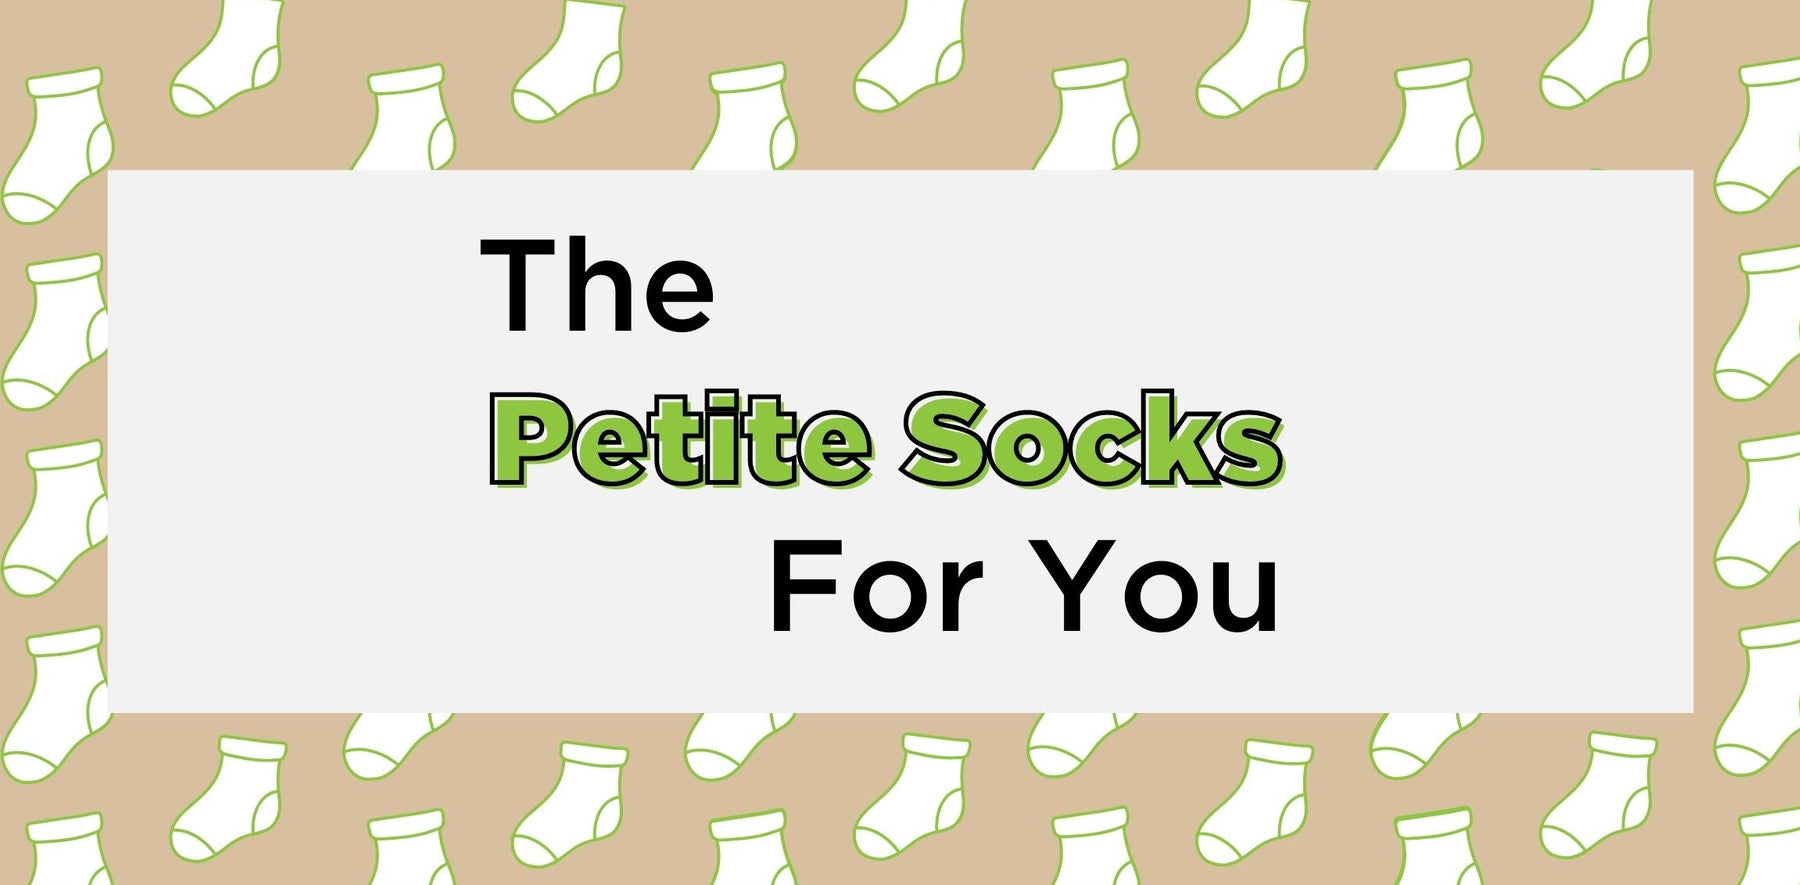 The Petite Socks For You